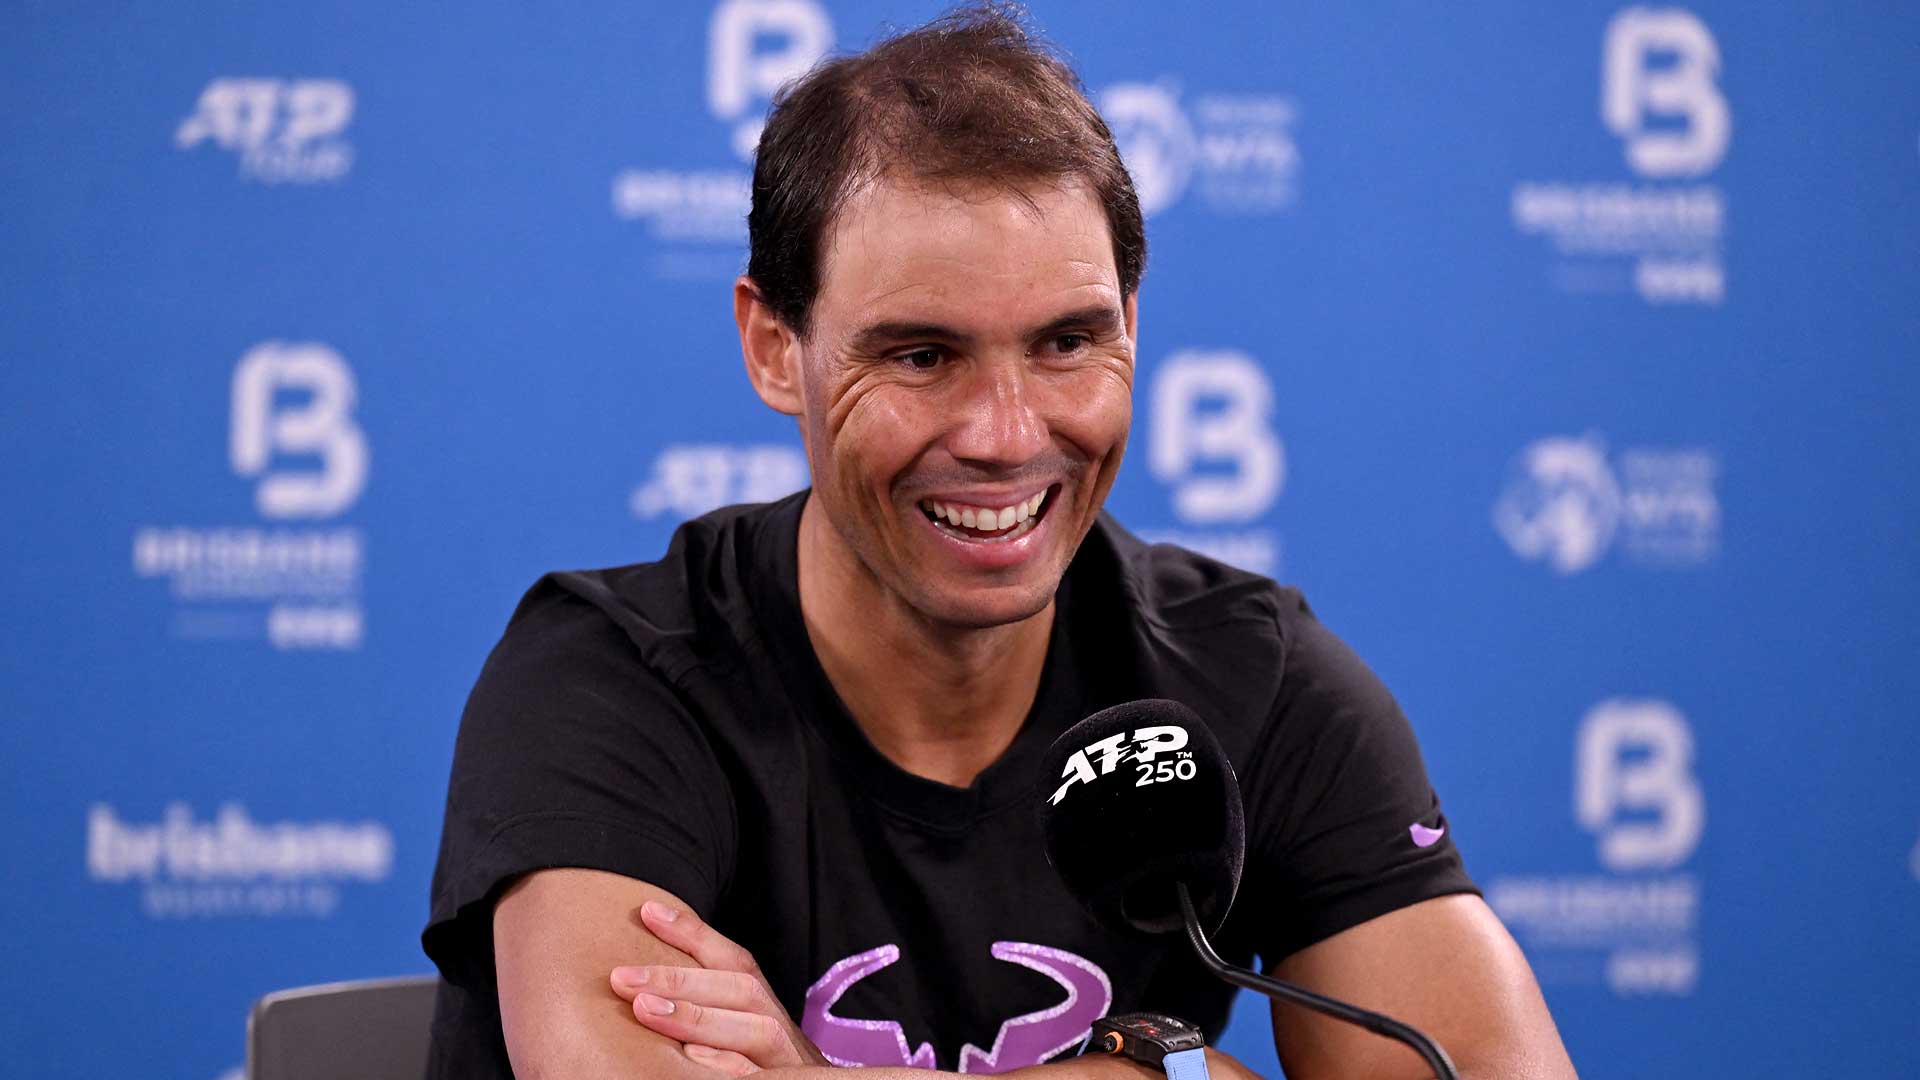 Rafael Nadal is competing at the Brisbane International presented by Evie for the first time since 2017.